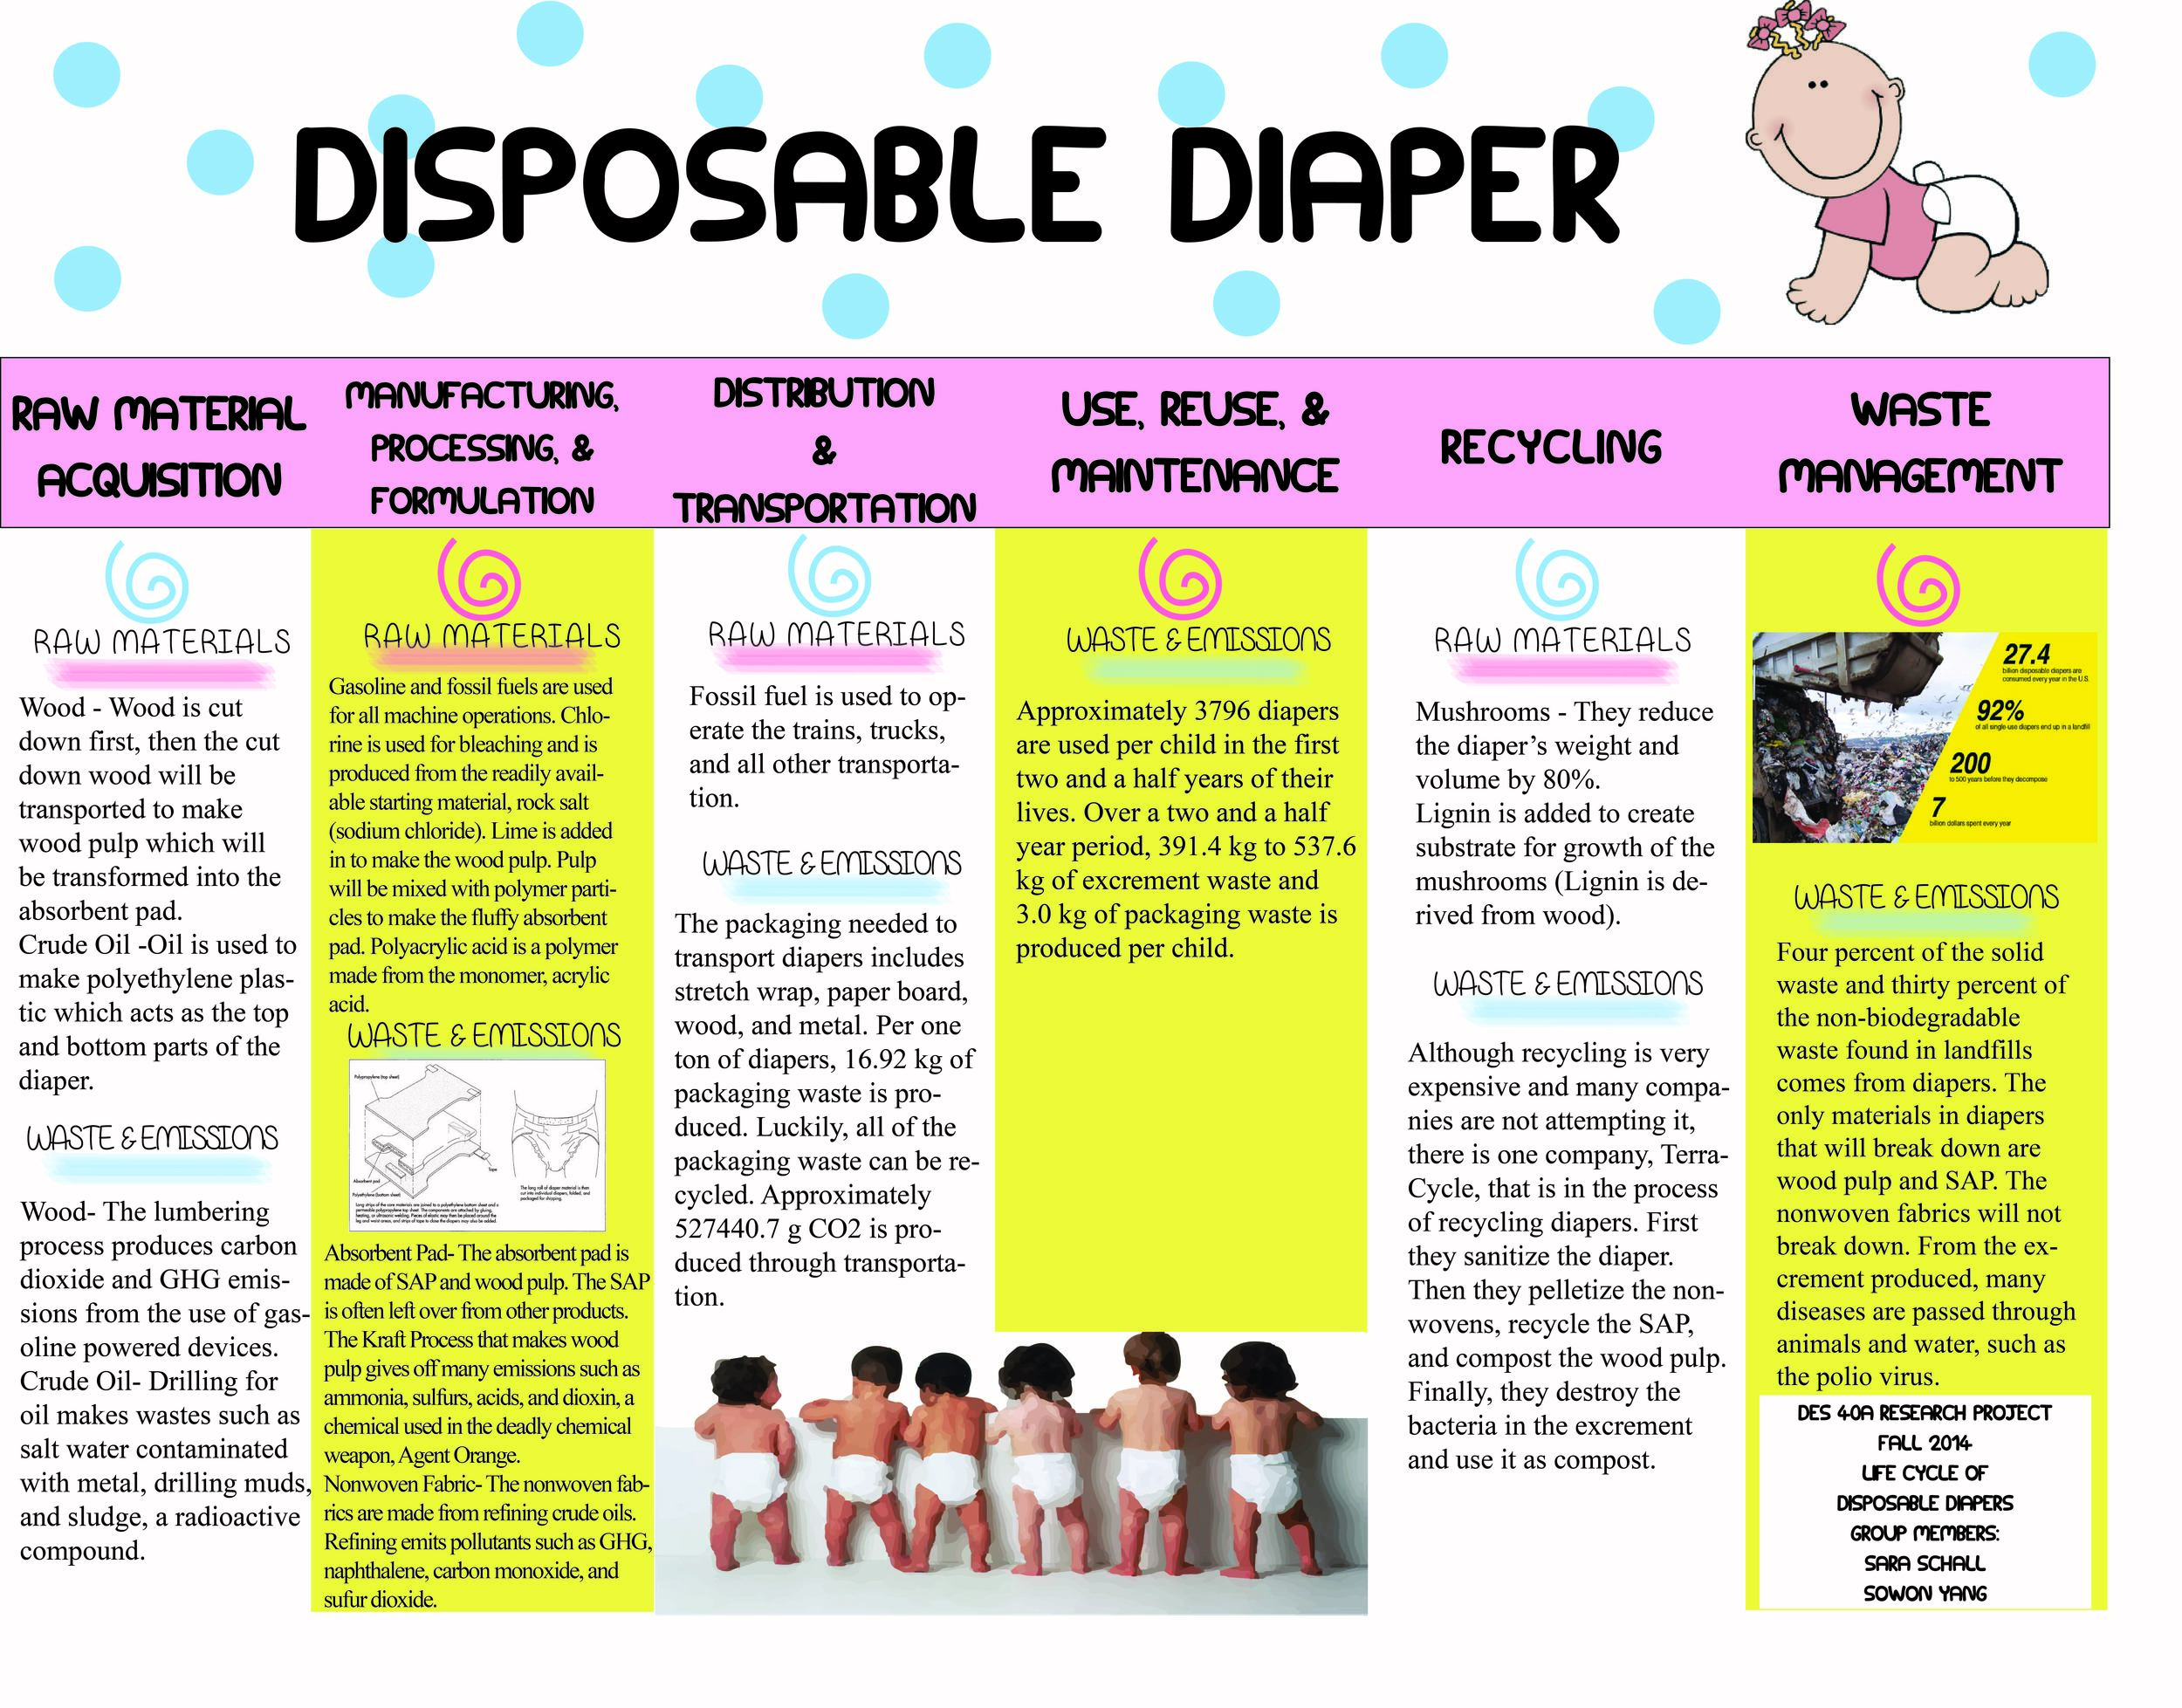 Disposable Diapers — Design Life-Cycle